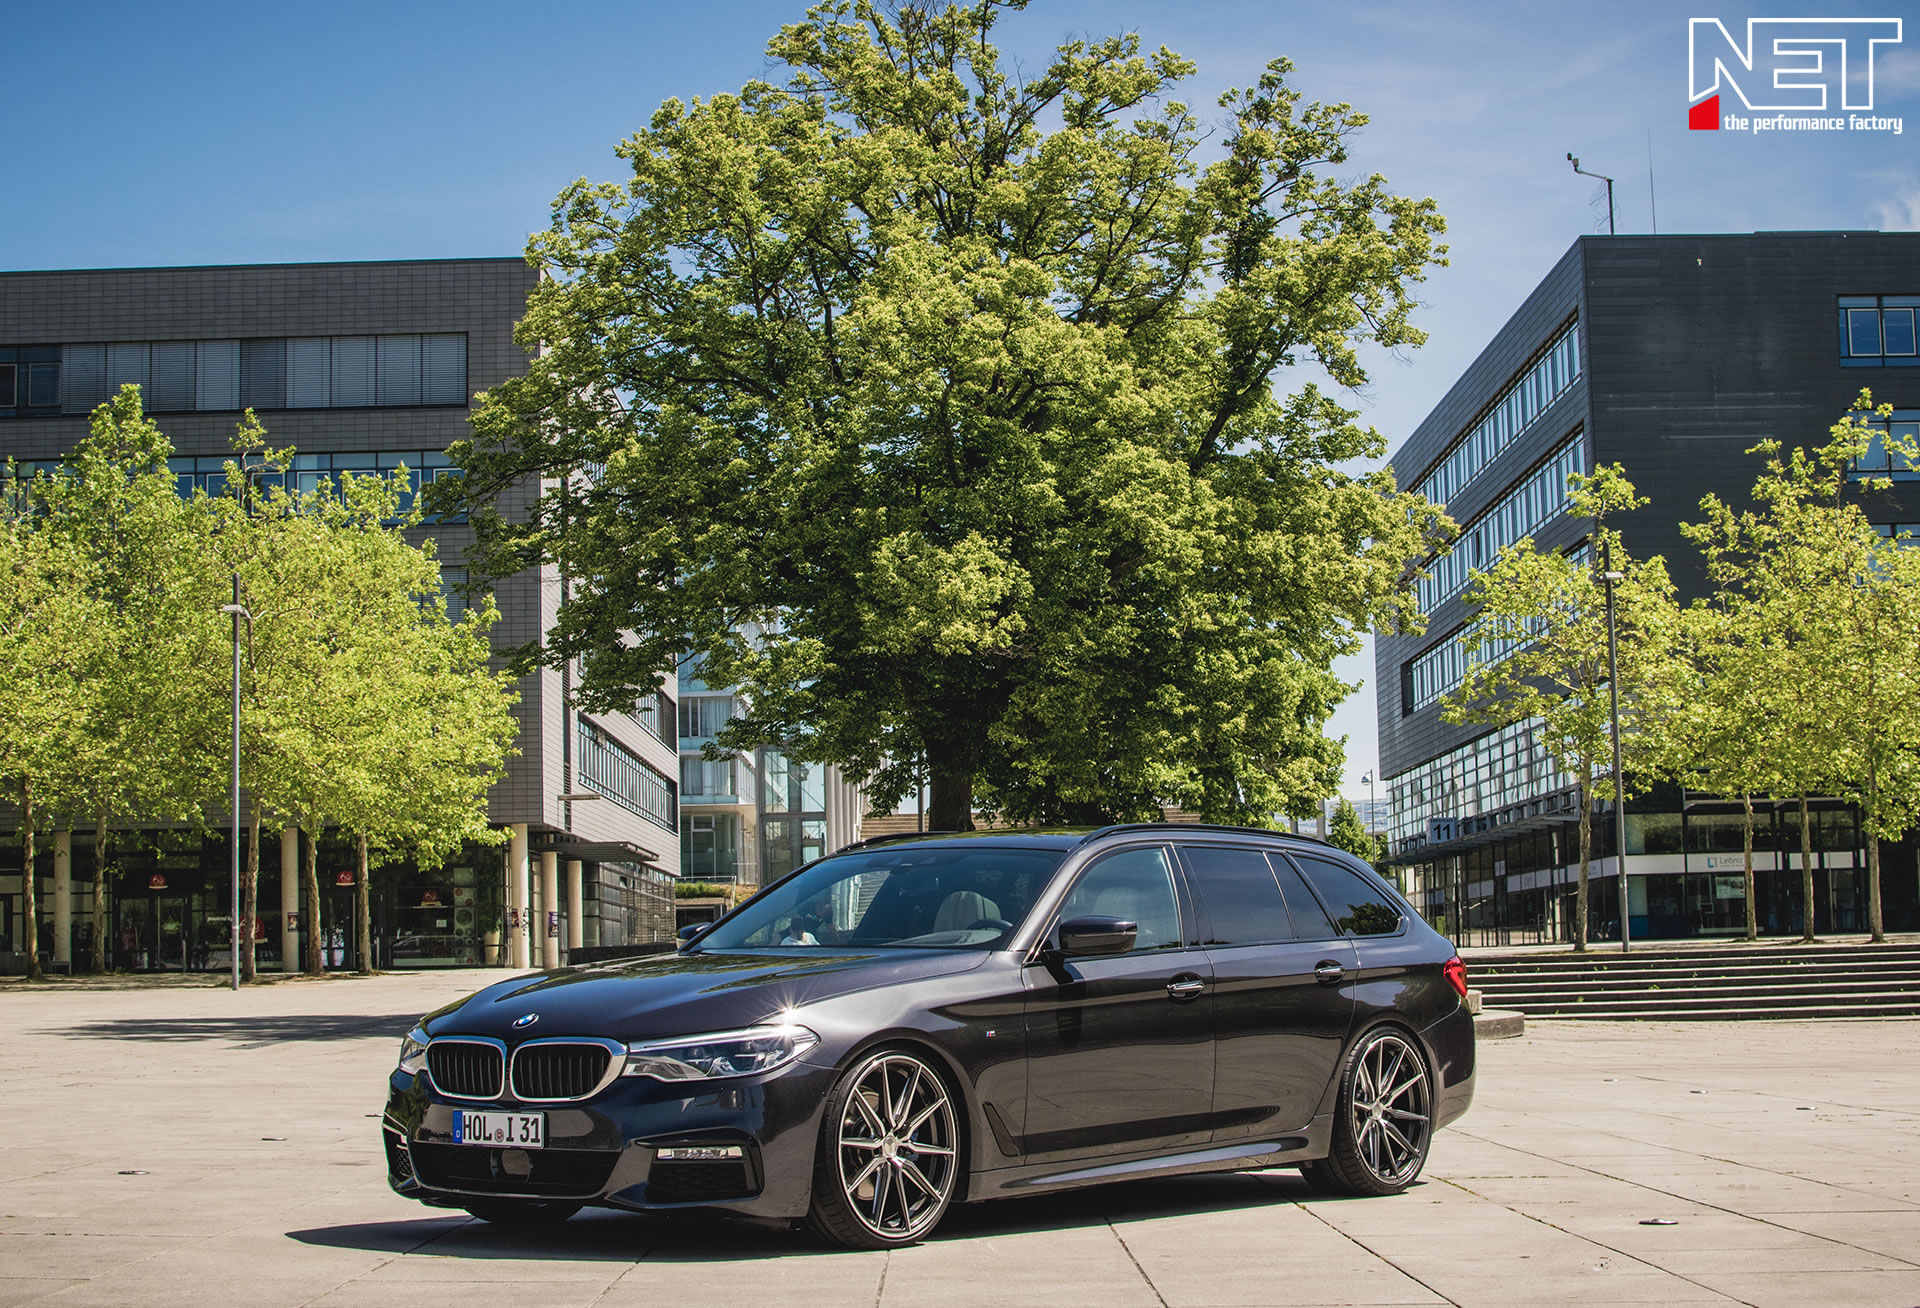 NET Galerie Car Tuning - BMW 530xd Touring (G31) - Chiptuning BMW 1-6